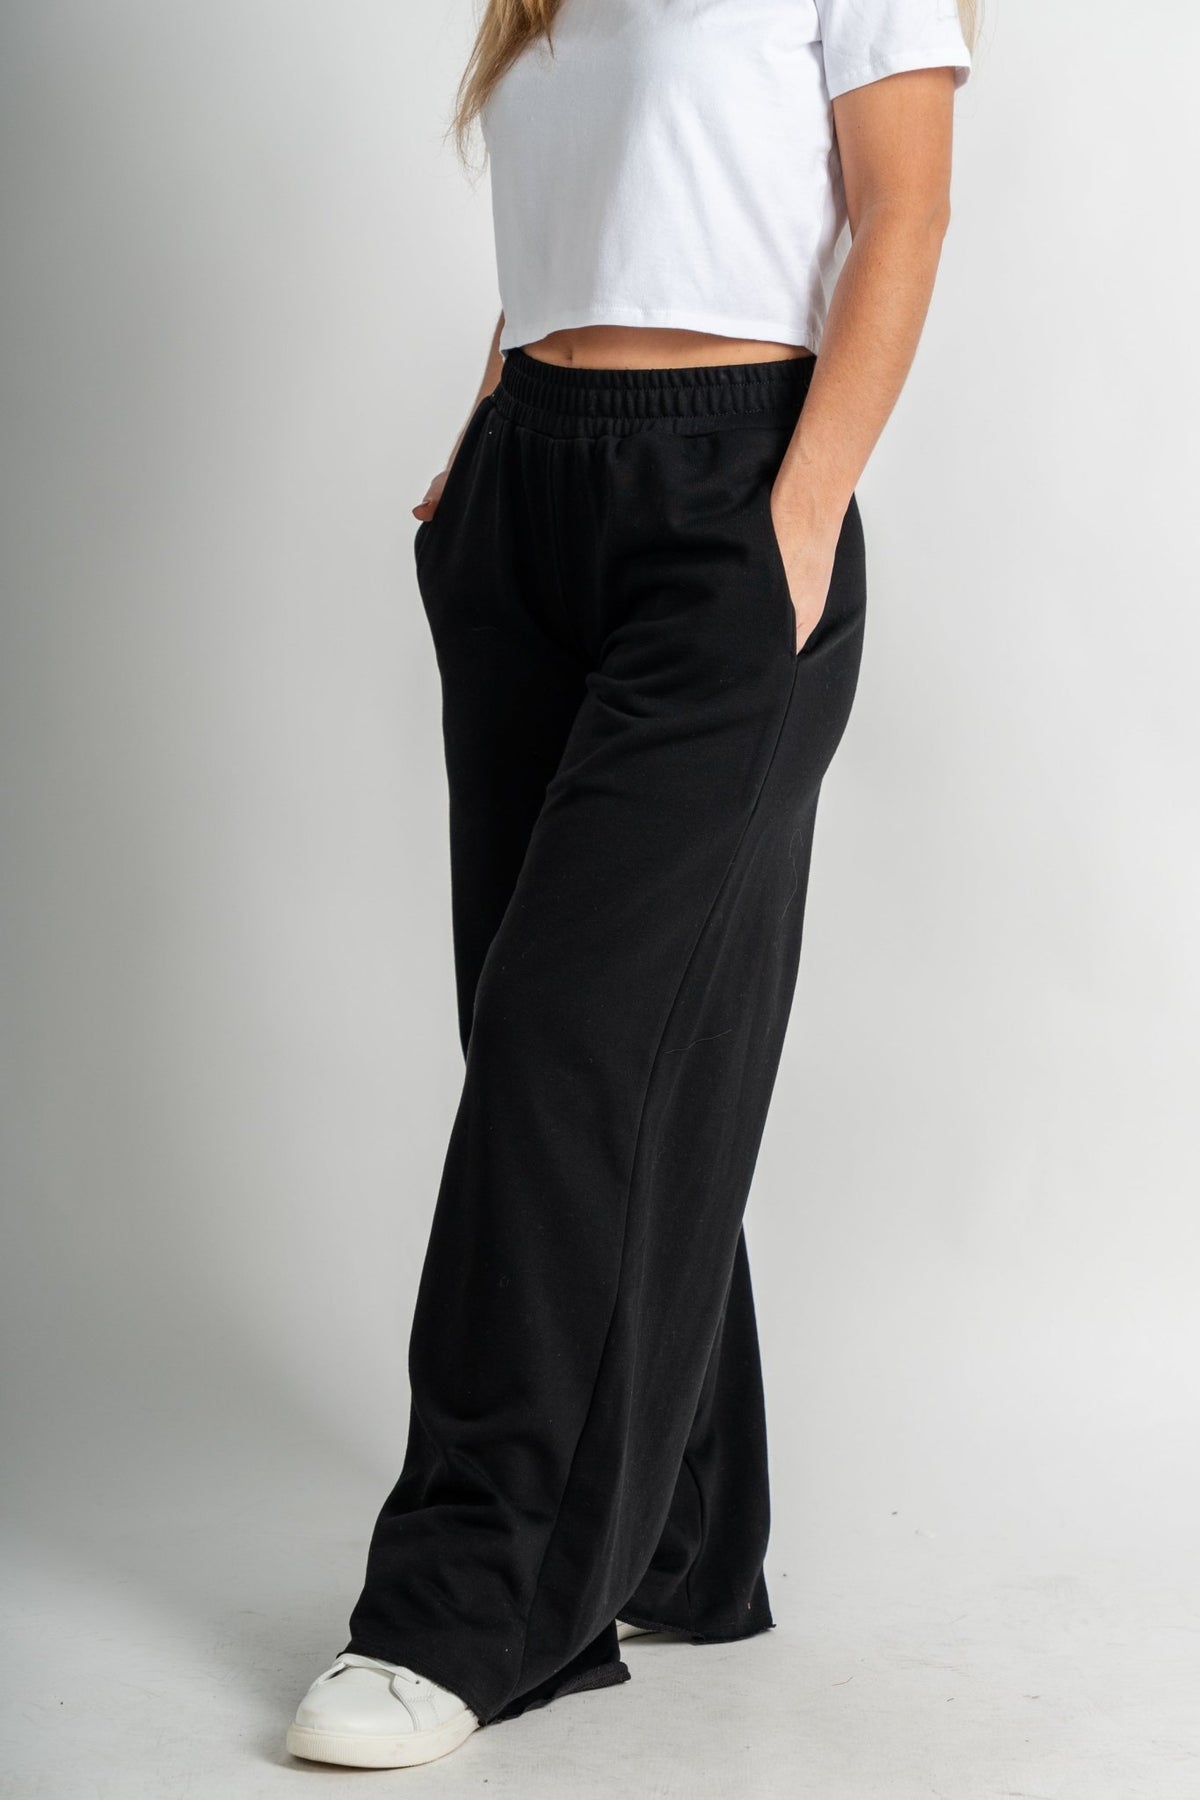 Vanessa wide leg lounge pant black - Trendy Pants - Cute Loungewear Collection at Lush Fashion Lounge Boutique in Oklahoma City